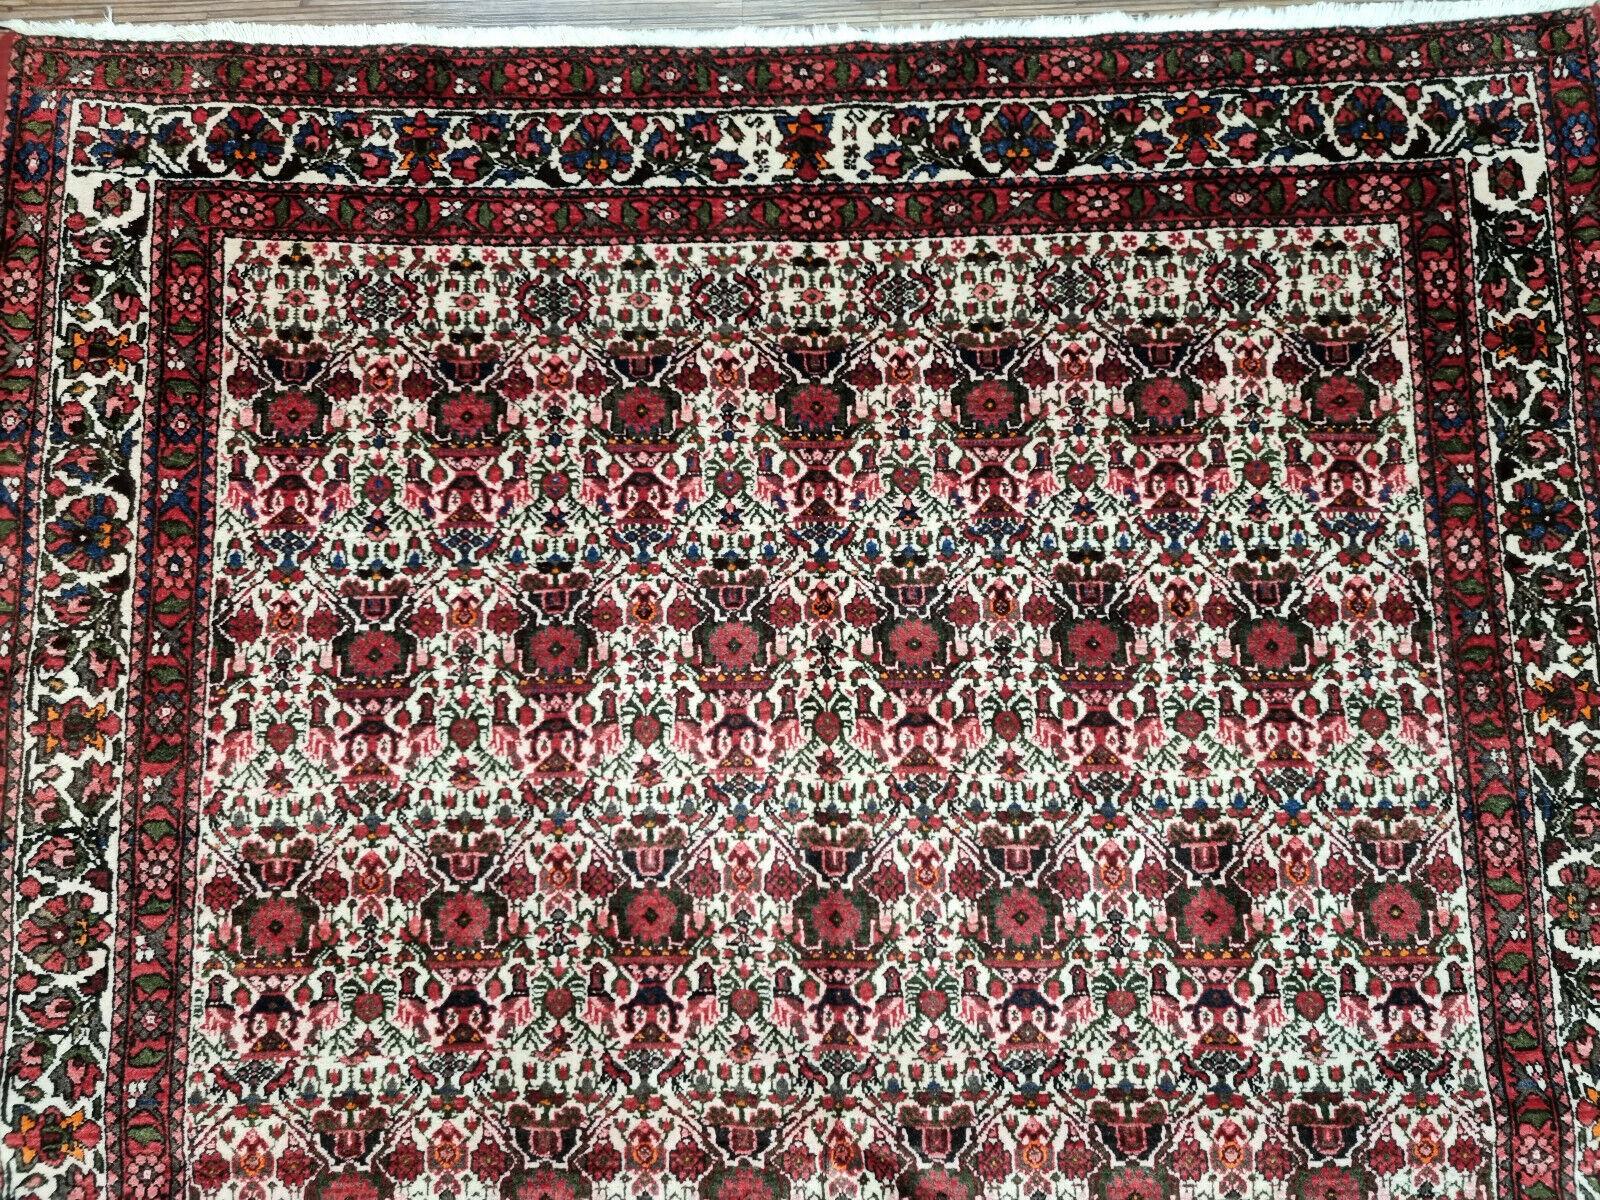 Early 20th Century Handmade Vintage Persian Style Afshar Rug 4.9' x 6.5', 1950s - 1D97 For Sale